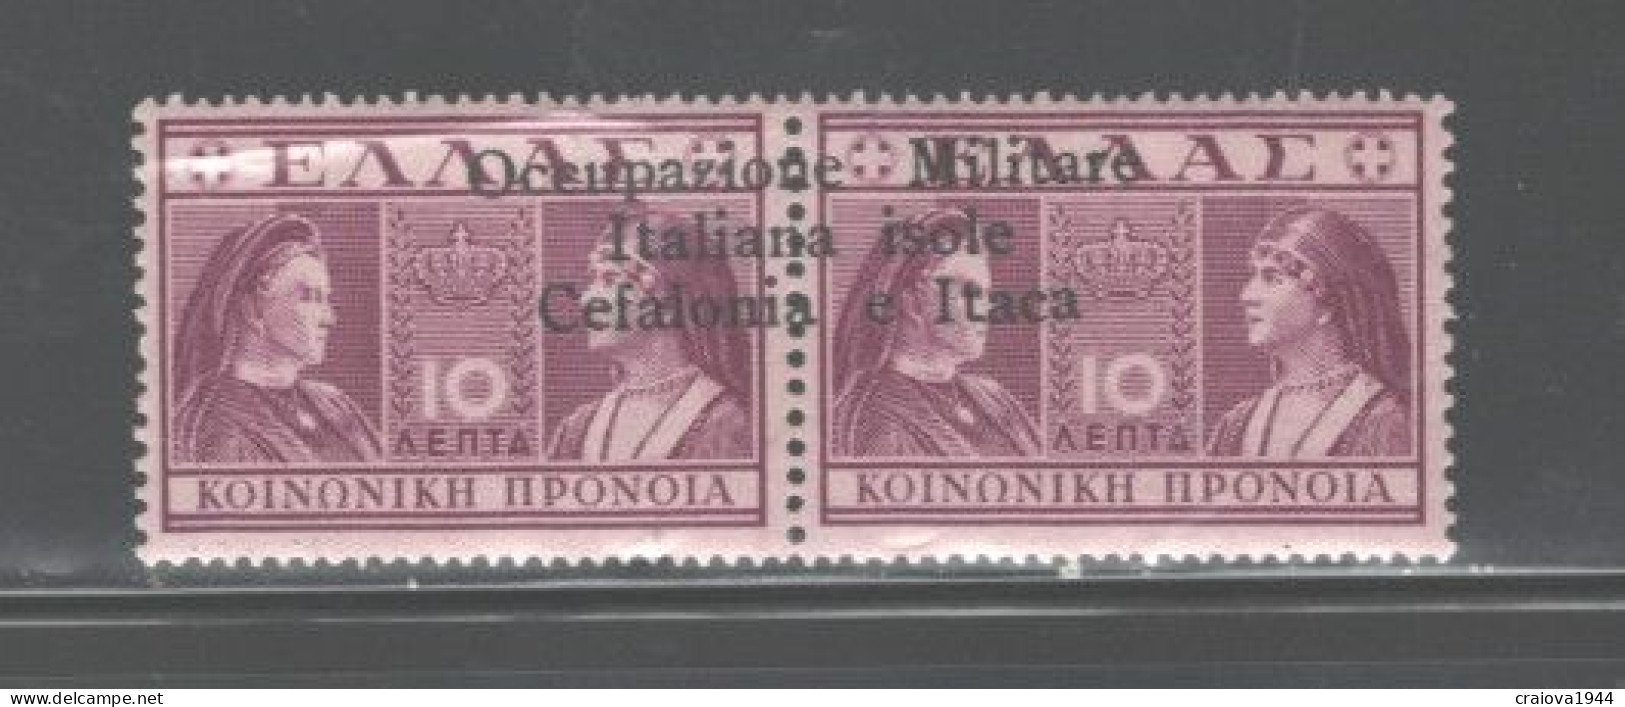 GREECE,1941"ISSUE FOR CEPHALONIA & ITHACA"#NR2a,Horz.OVPT. MNH, CERT. - Isole Ioniche